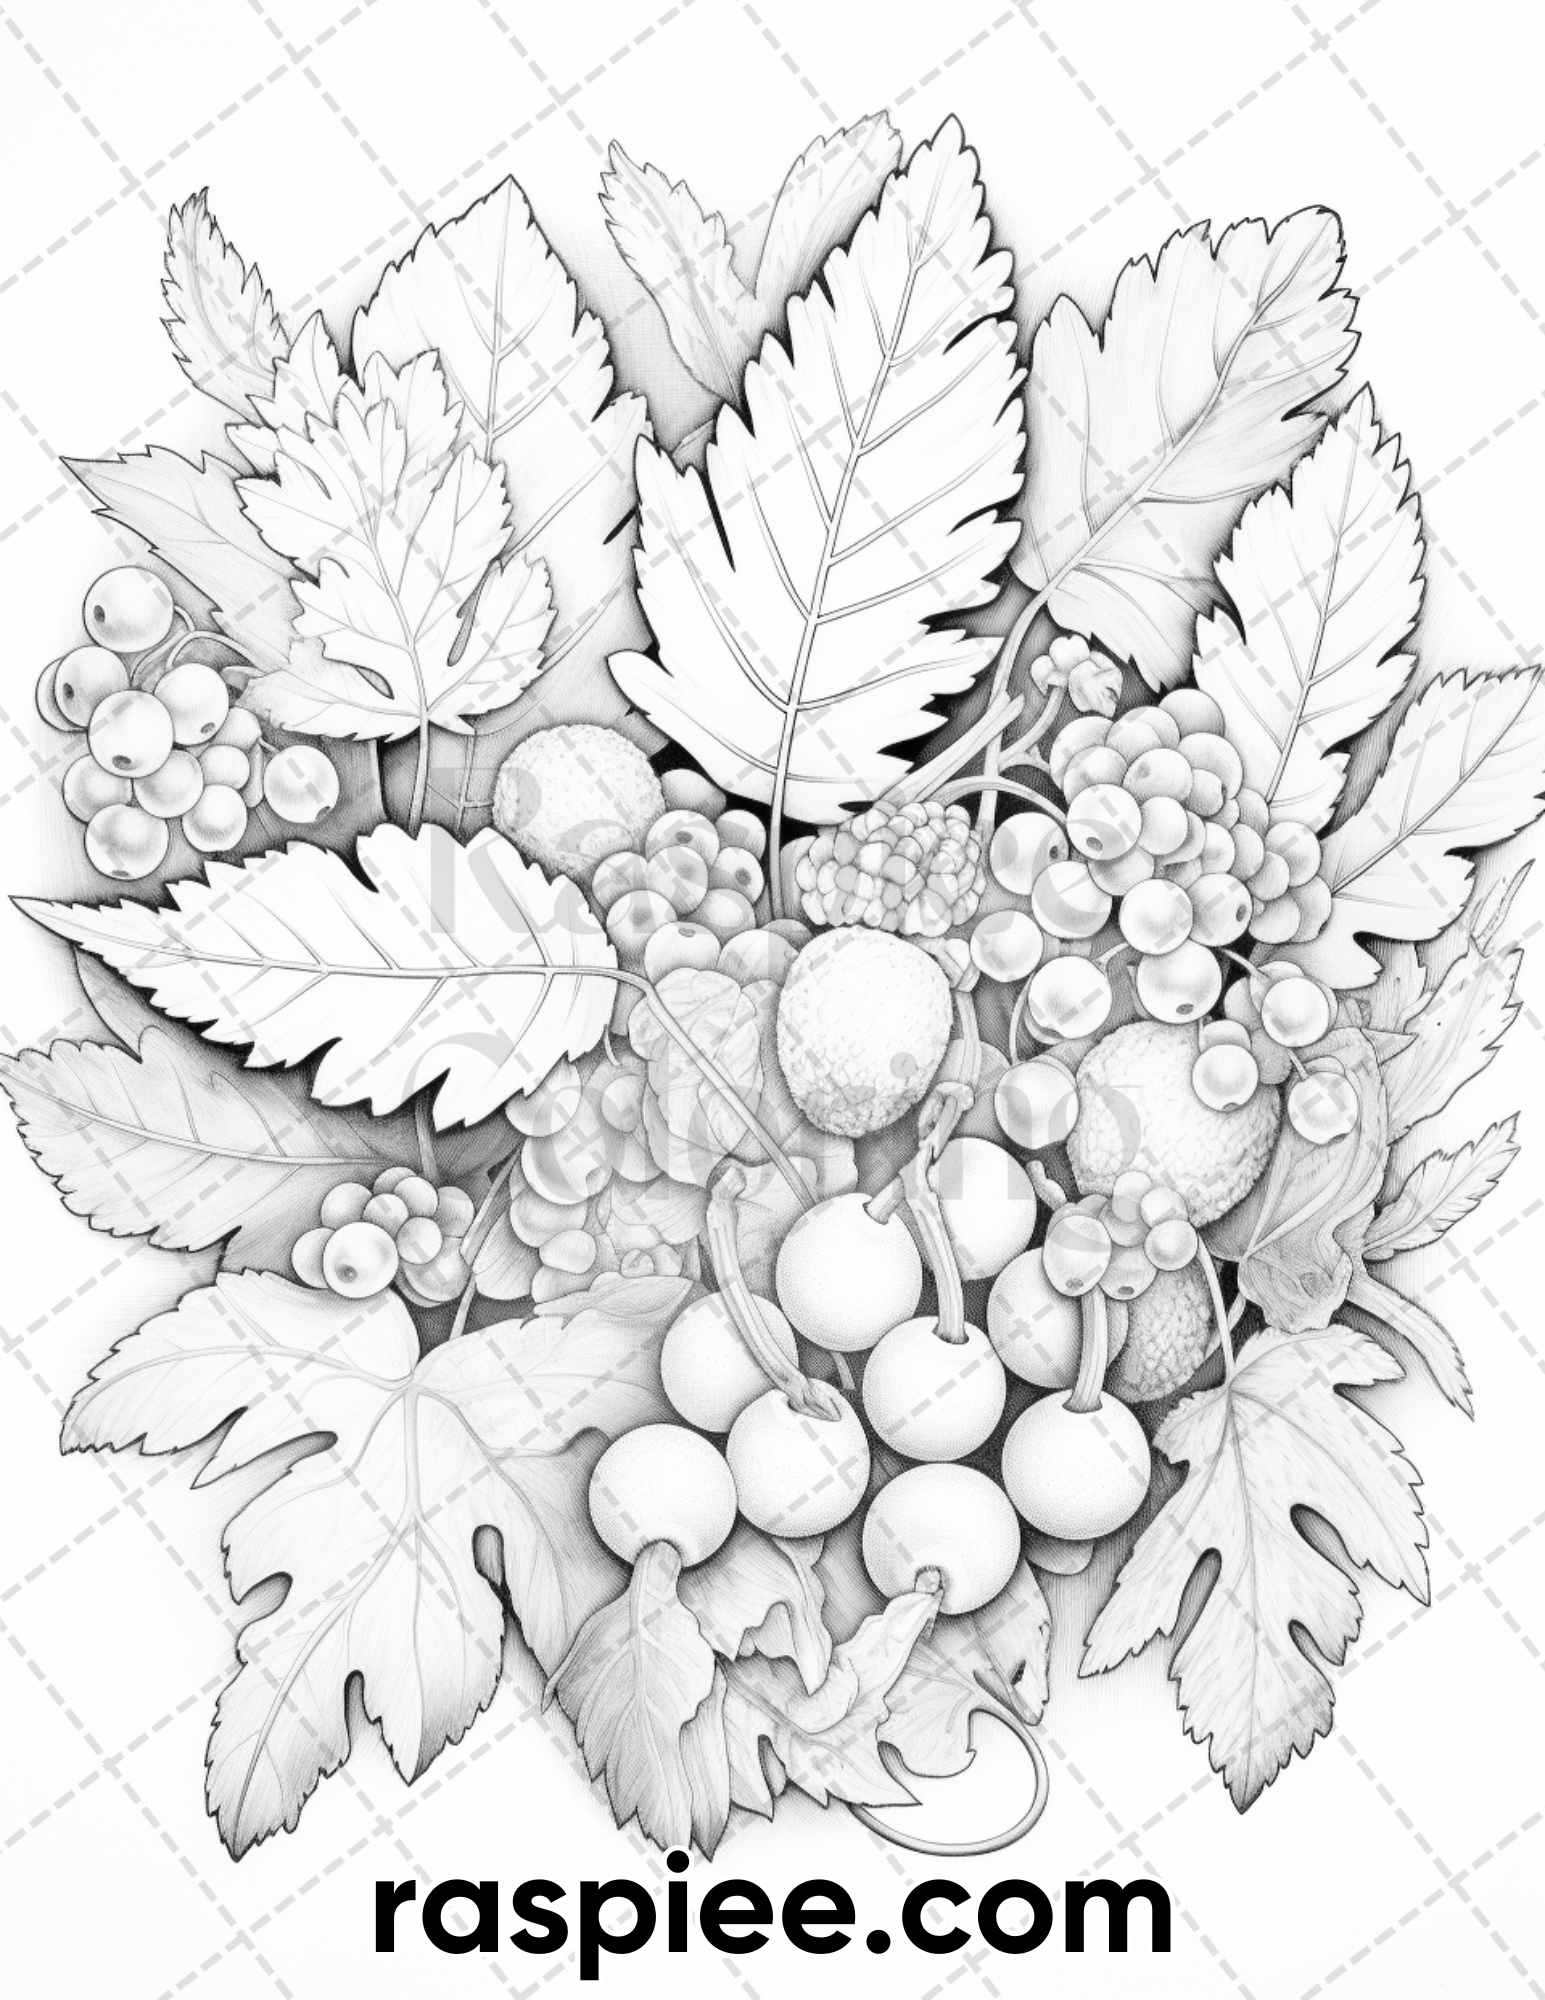 Adult coloring printable sheets, Happy Thanksgiving coloring pages, thanksgiving coloring book printable, holiday coloring pages, autumn coloring pages, fall coloring pages, autumn coloring sheets, thanksgiving coloring sheets